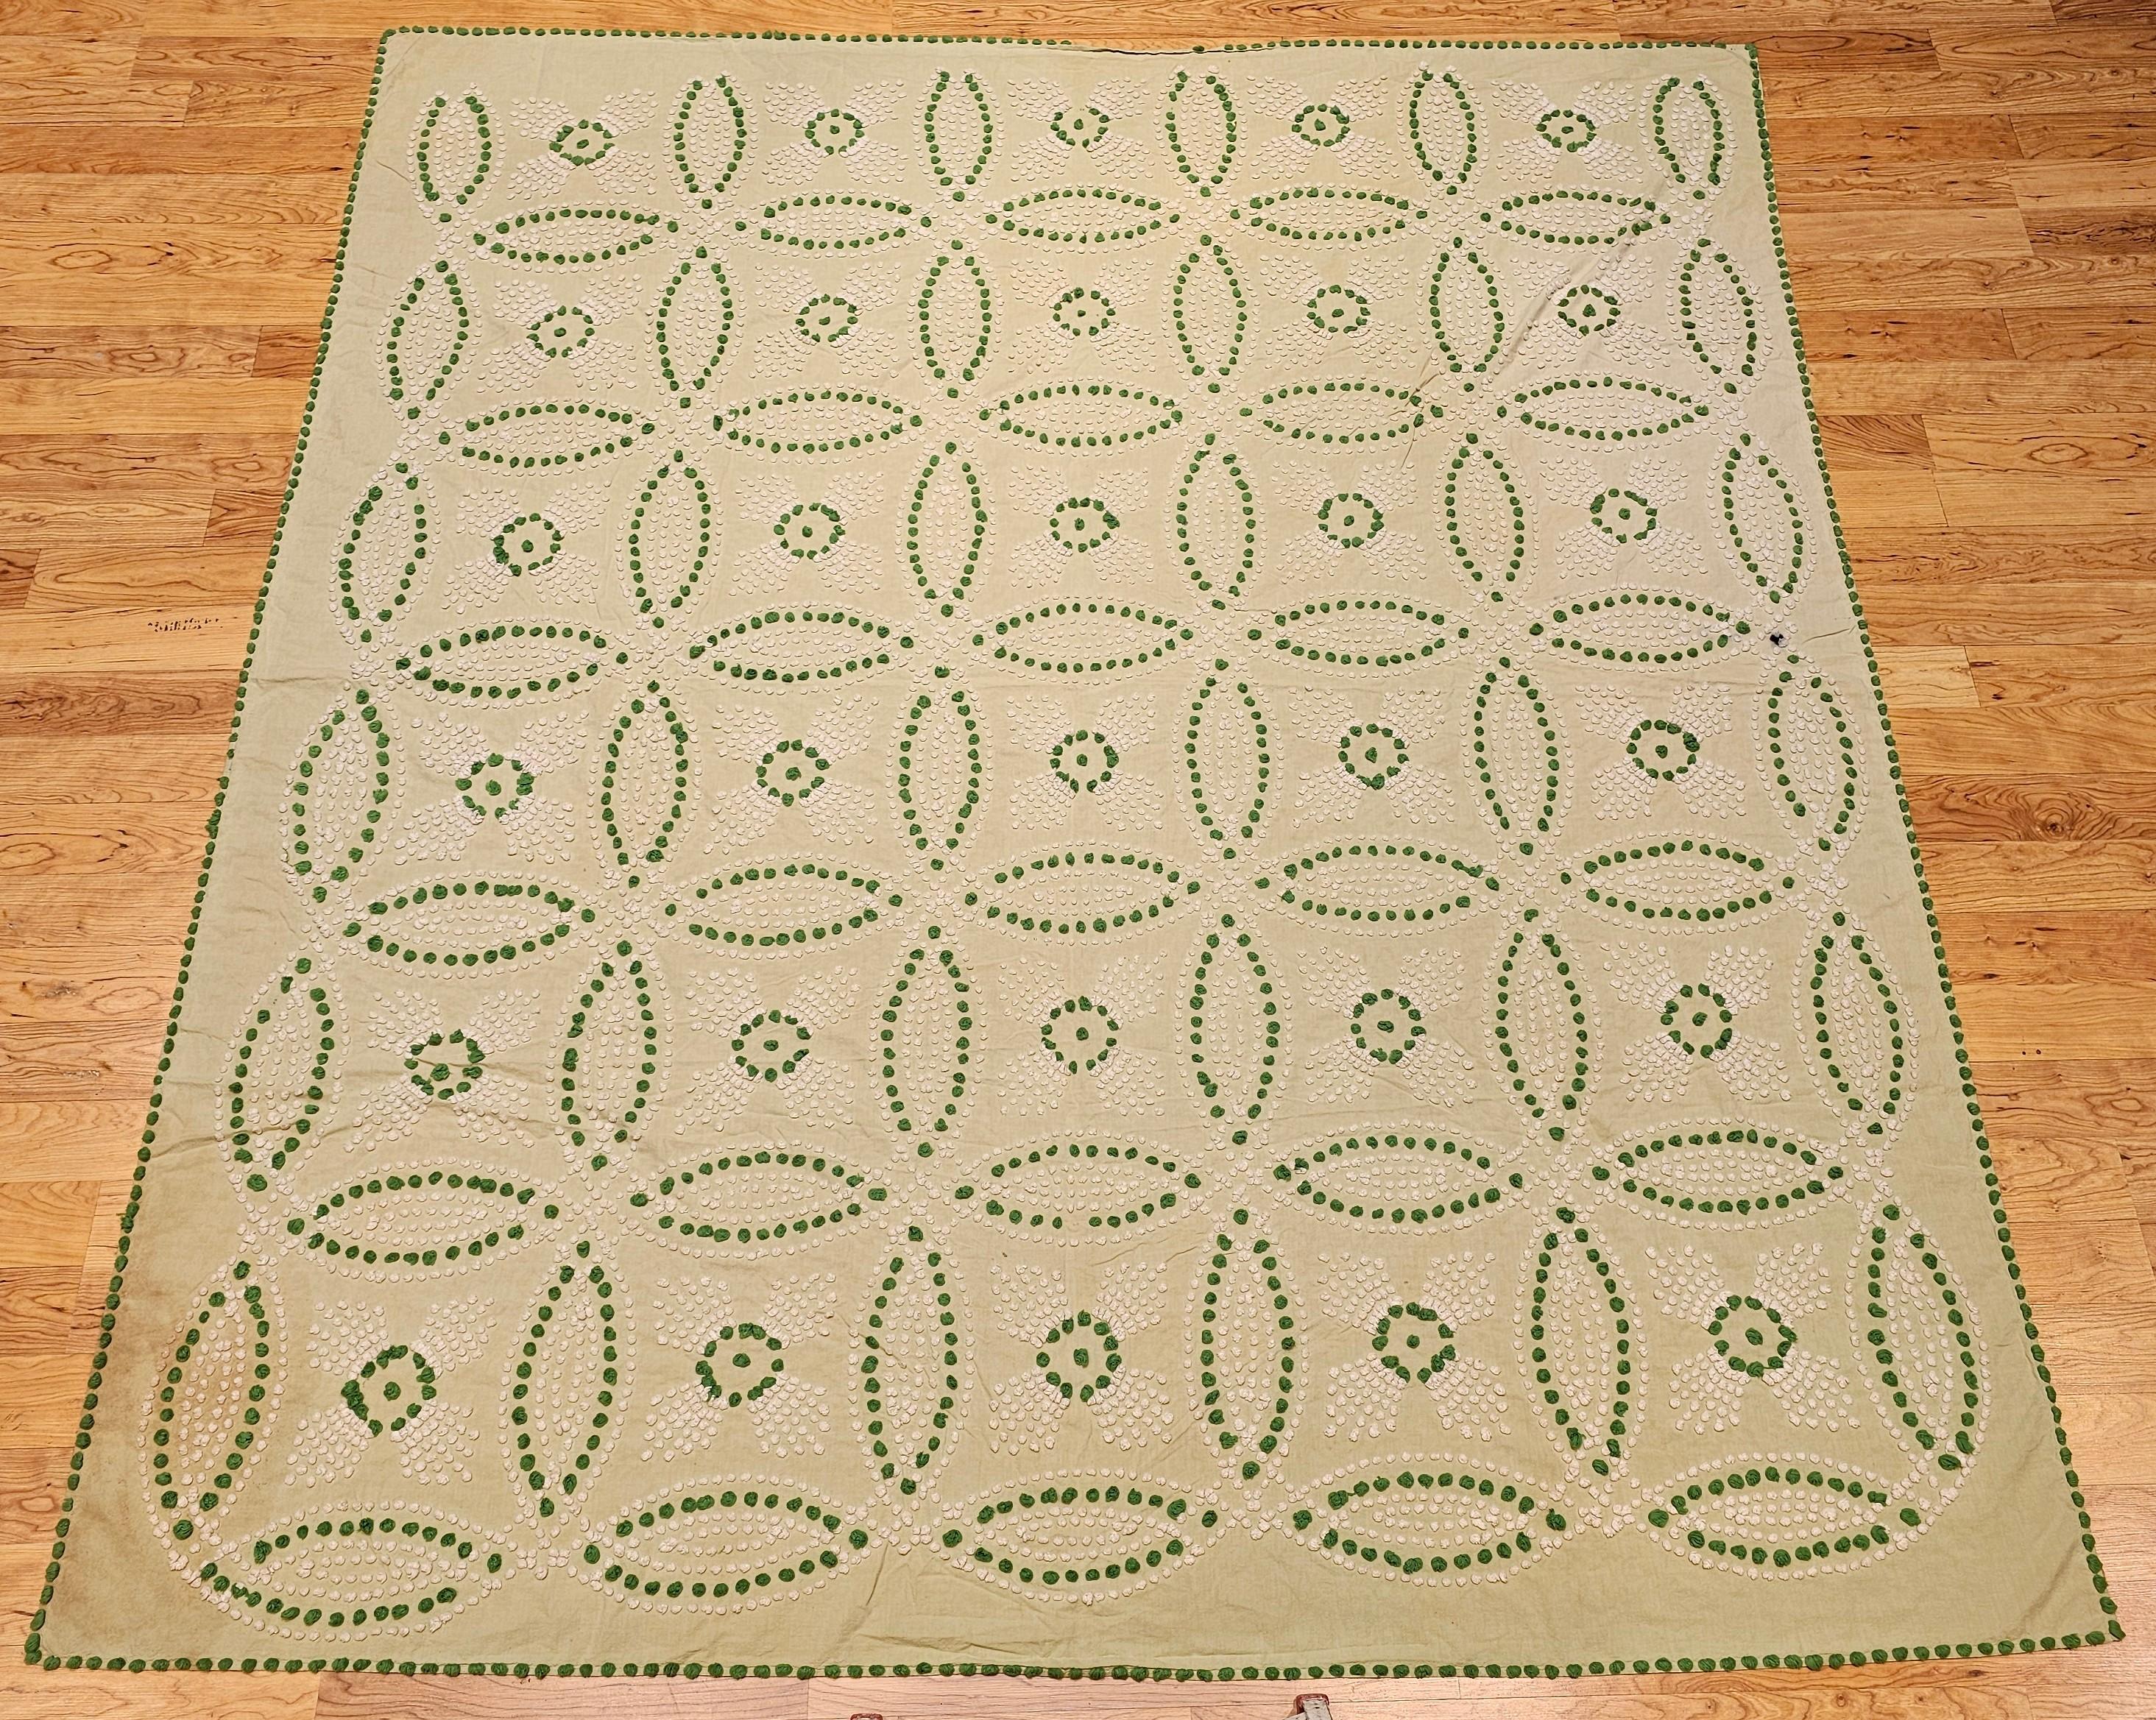  Early 20th century hand-stitched southern quilt top from SE United States most likely North Carolina.  It has a “Double Wedding Ring” quilt pattern set on  a lime green background with the ring designs in hand embroidered ivory and green colors